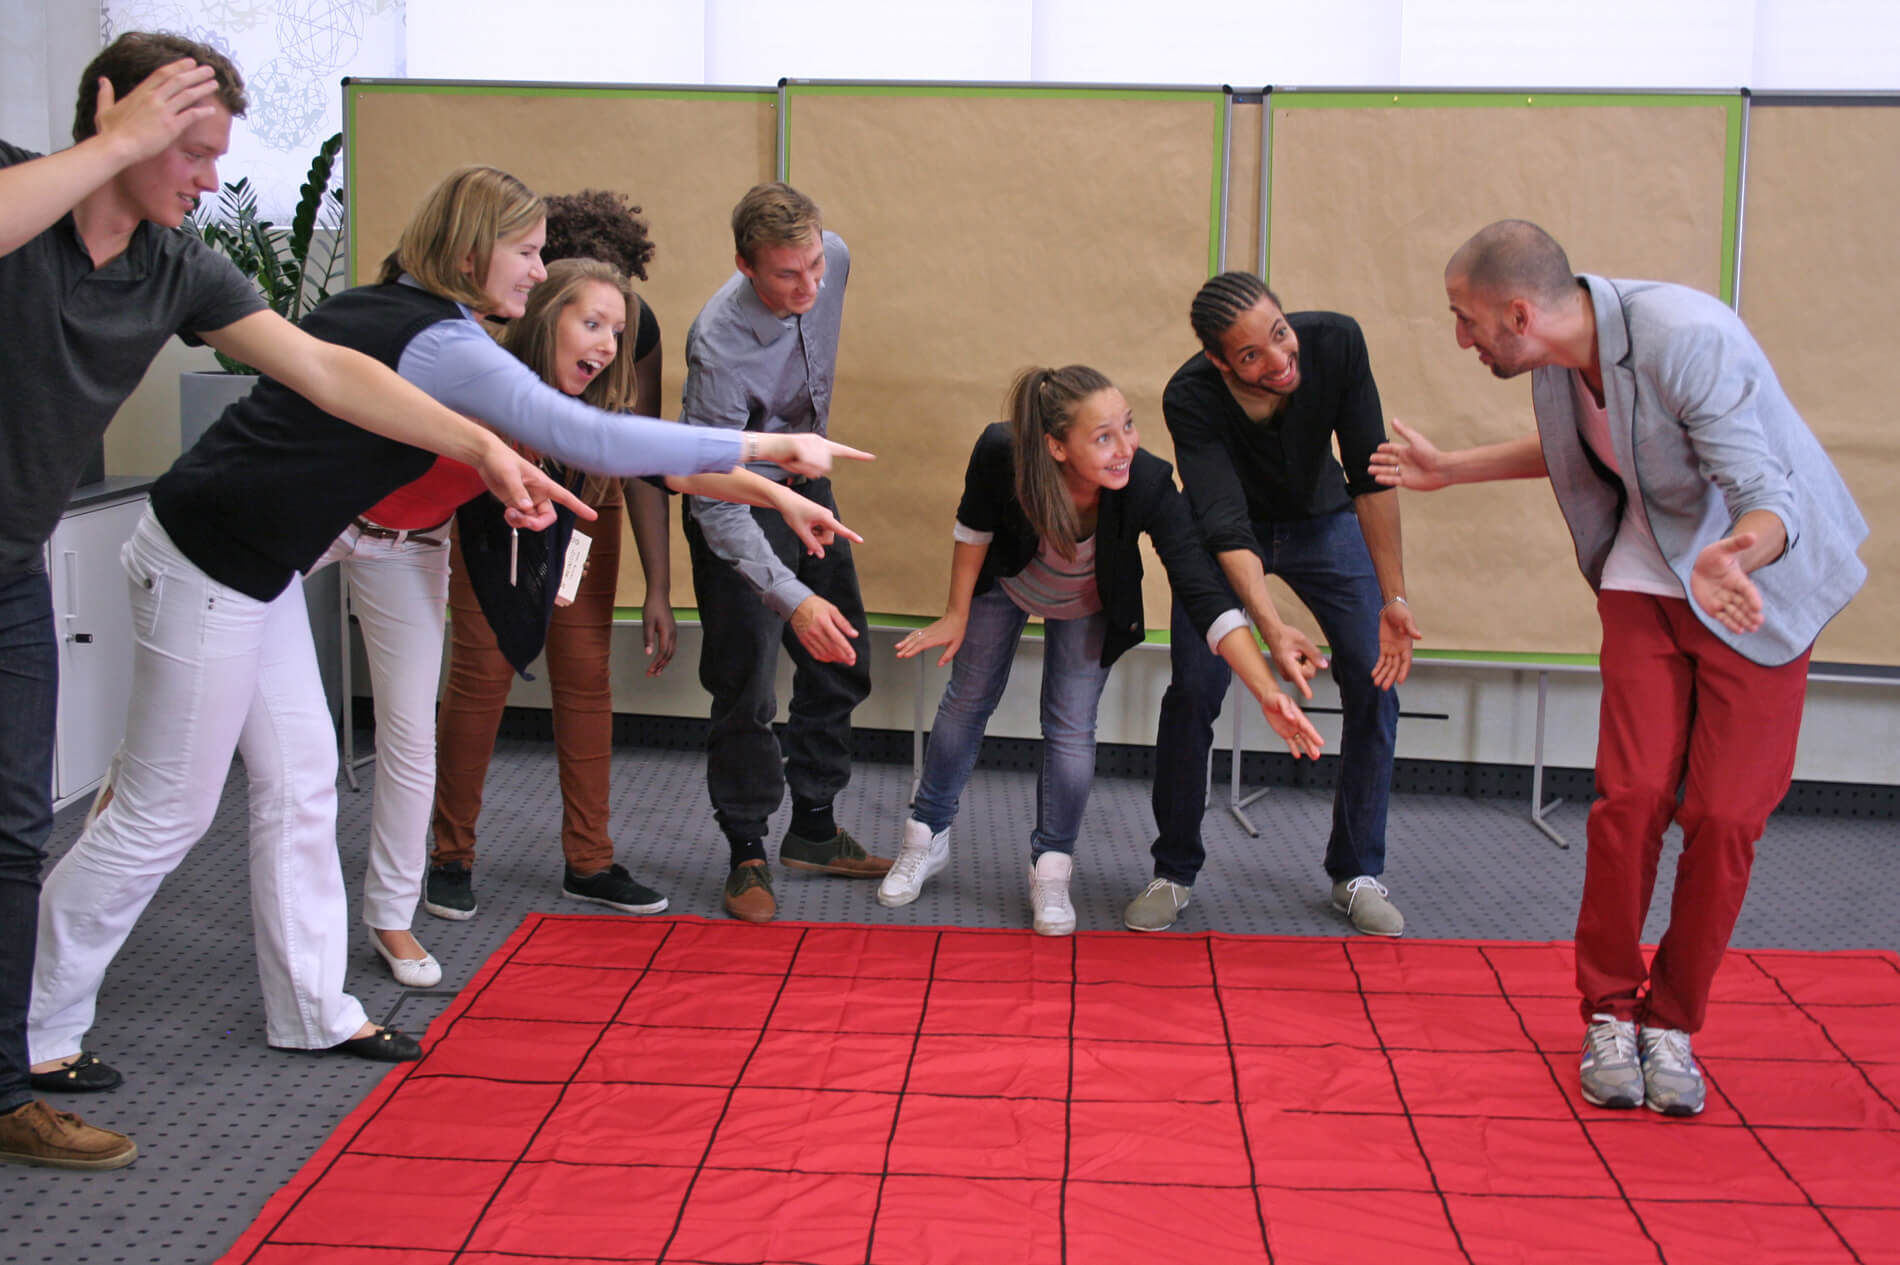 A man standing on a red floor mat called The Maze receives movement recommendations from coworkers.